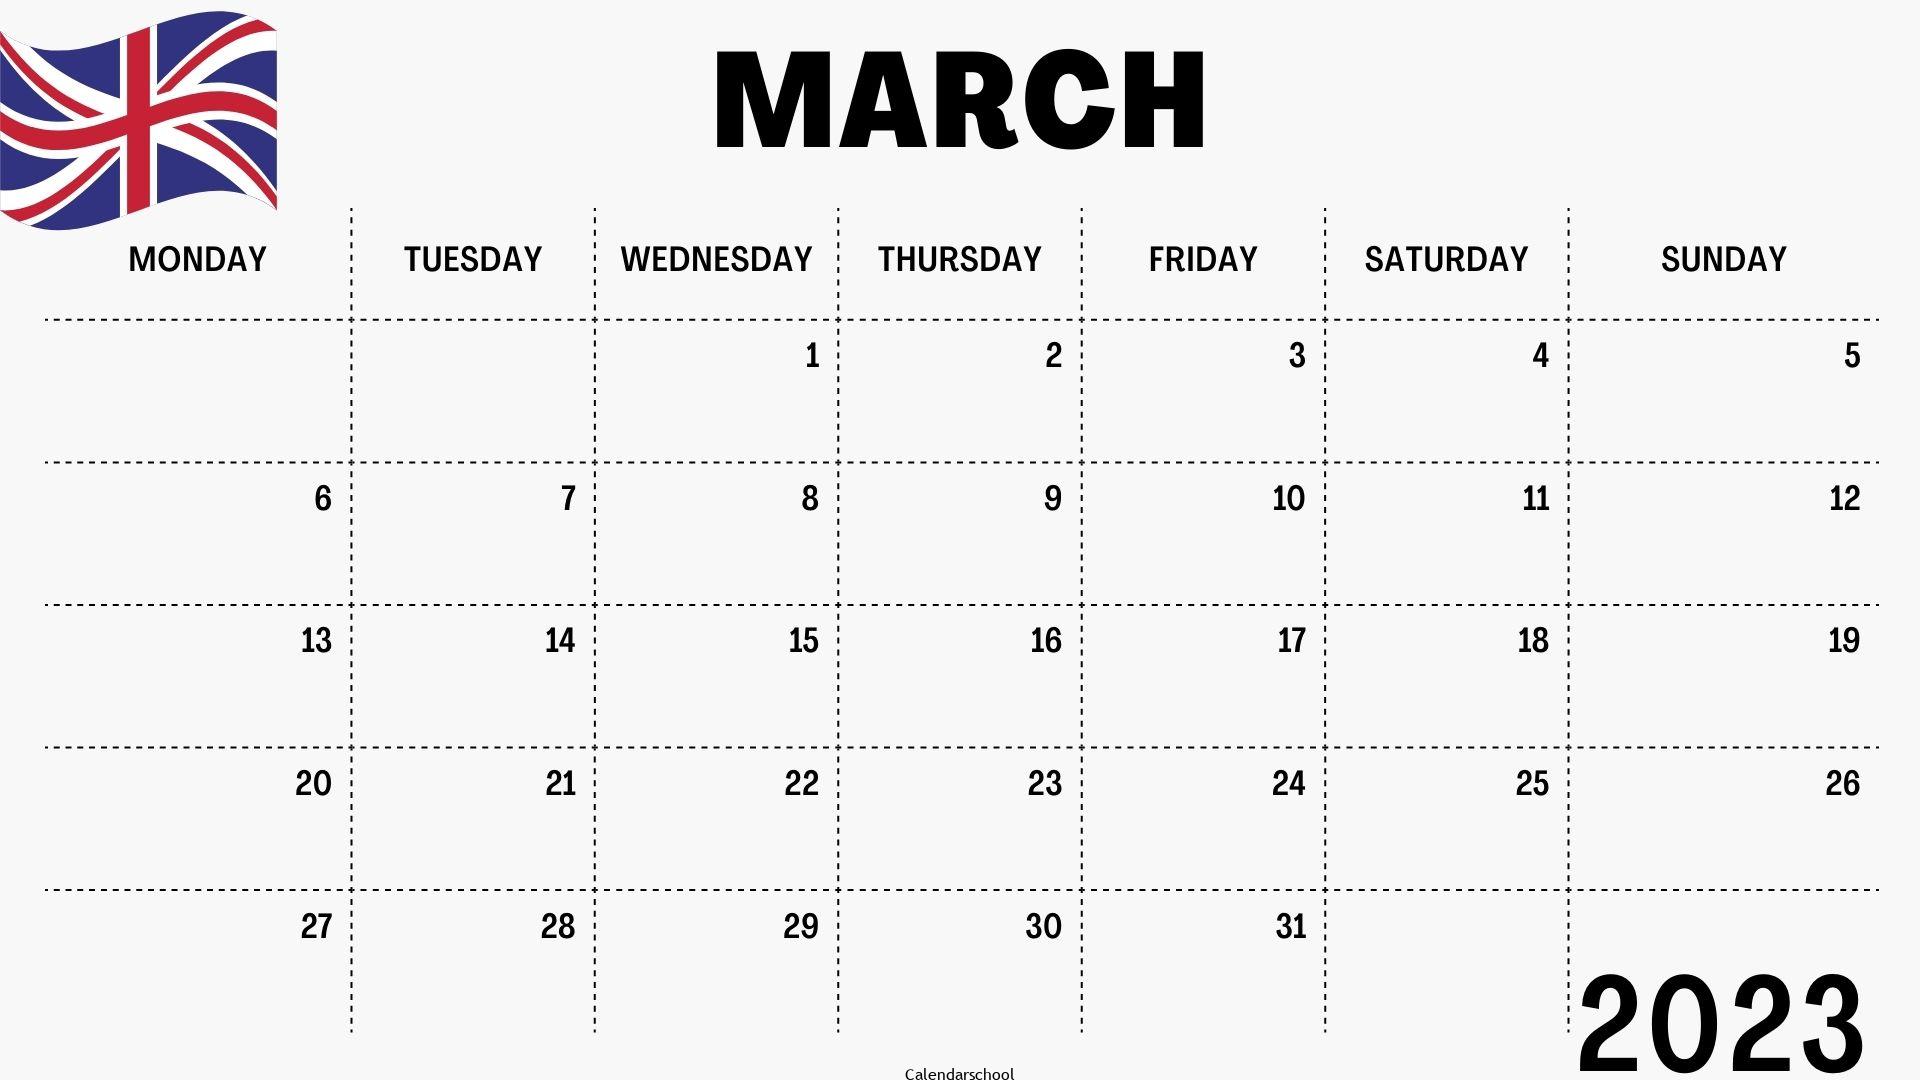 March 2023 Calendar with Holidays UK